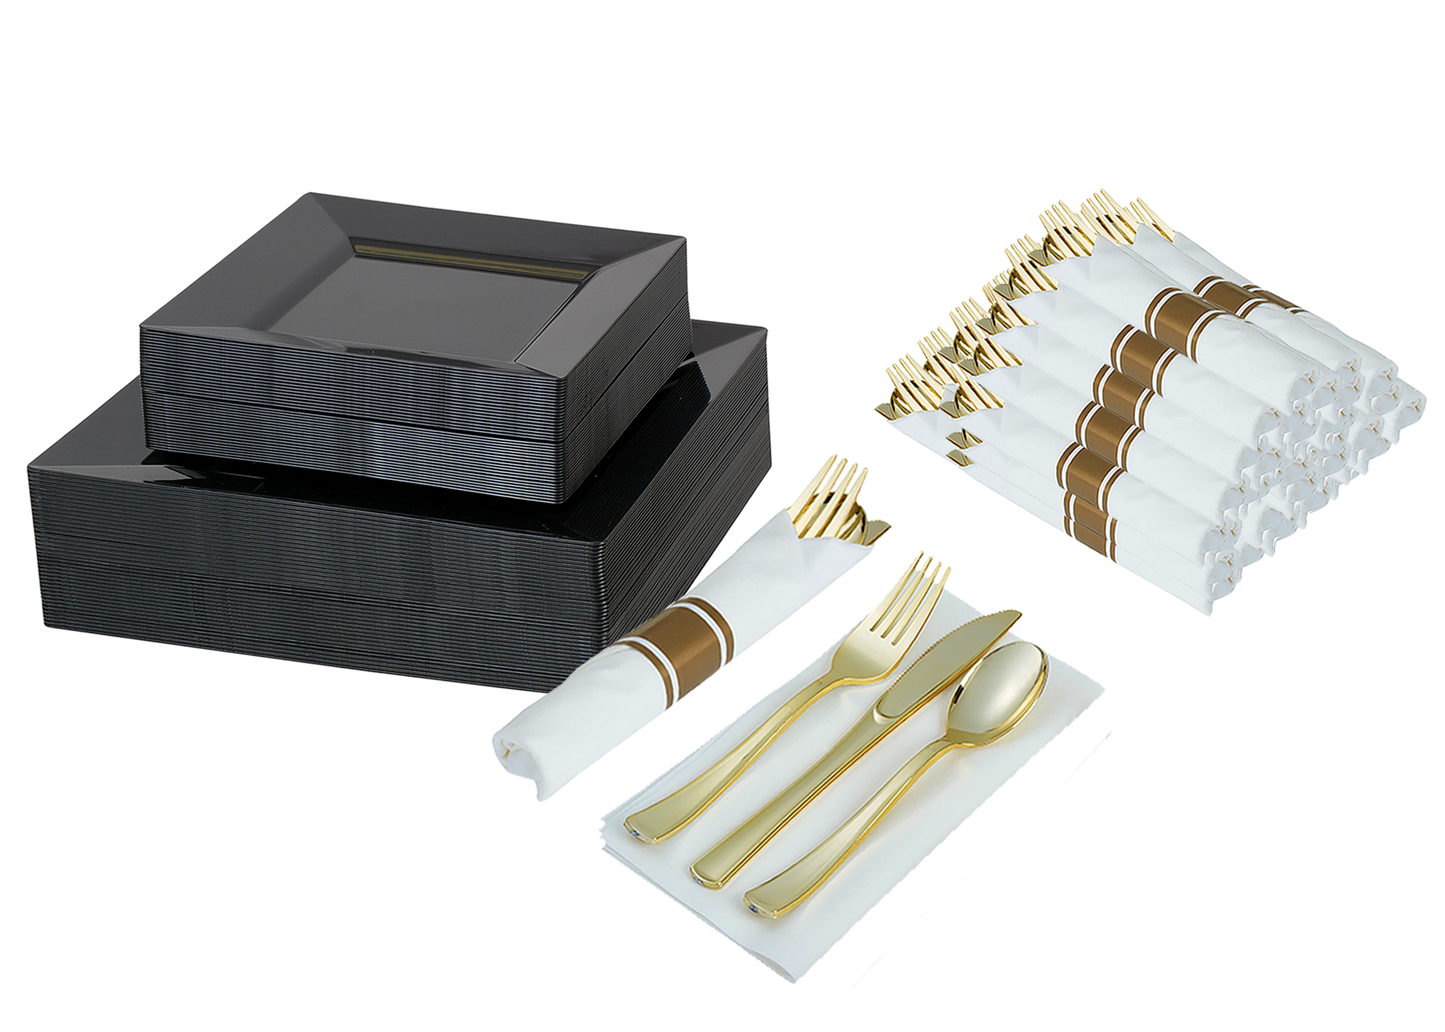 Disposable dinnerware set for 40 guests 280 pieces Includes: 40 black square plastic dinner plates, 40 salad plates, 50 pre-rolled linen feel napkins with gold spoons, forks & knives wrapped inside.